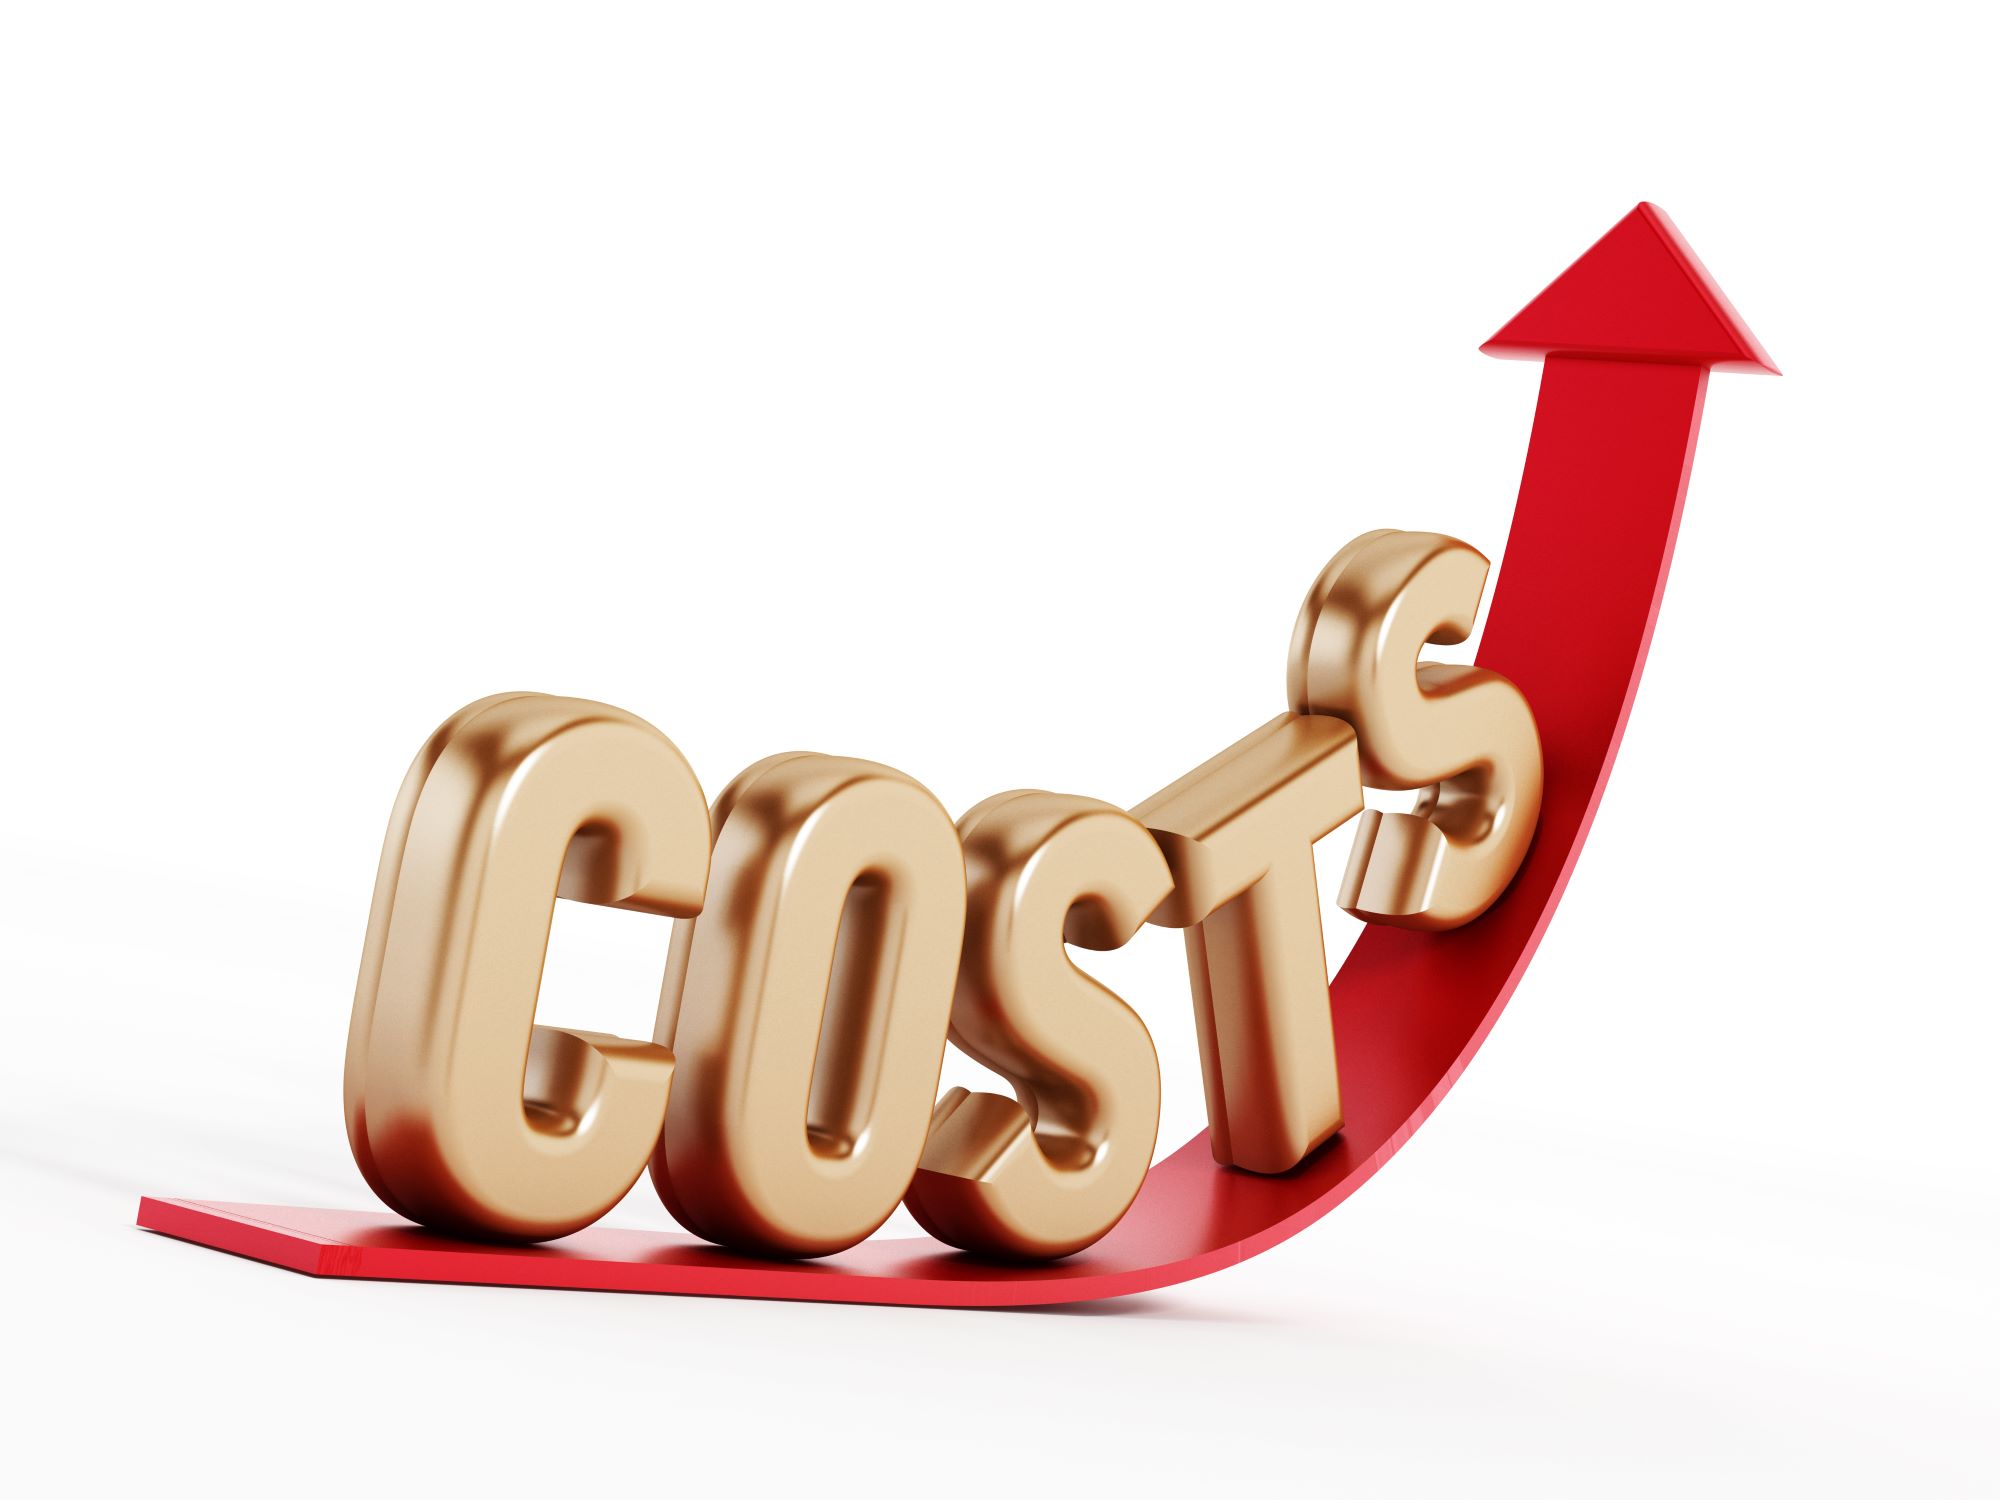 rising cost concept, a red arrow pointing up with the word "costs" riding upward on the arrow